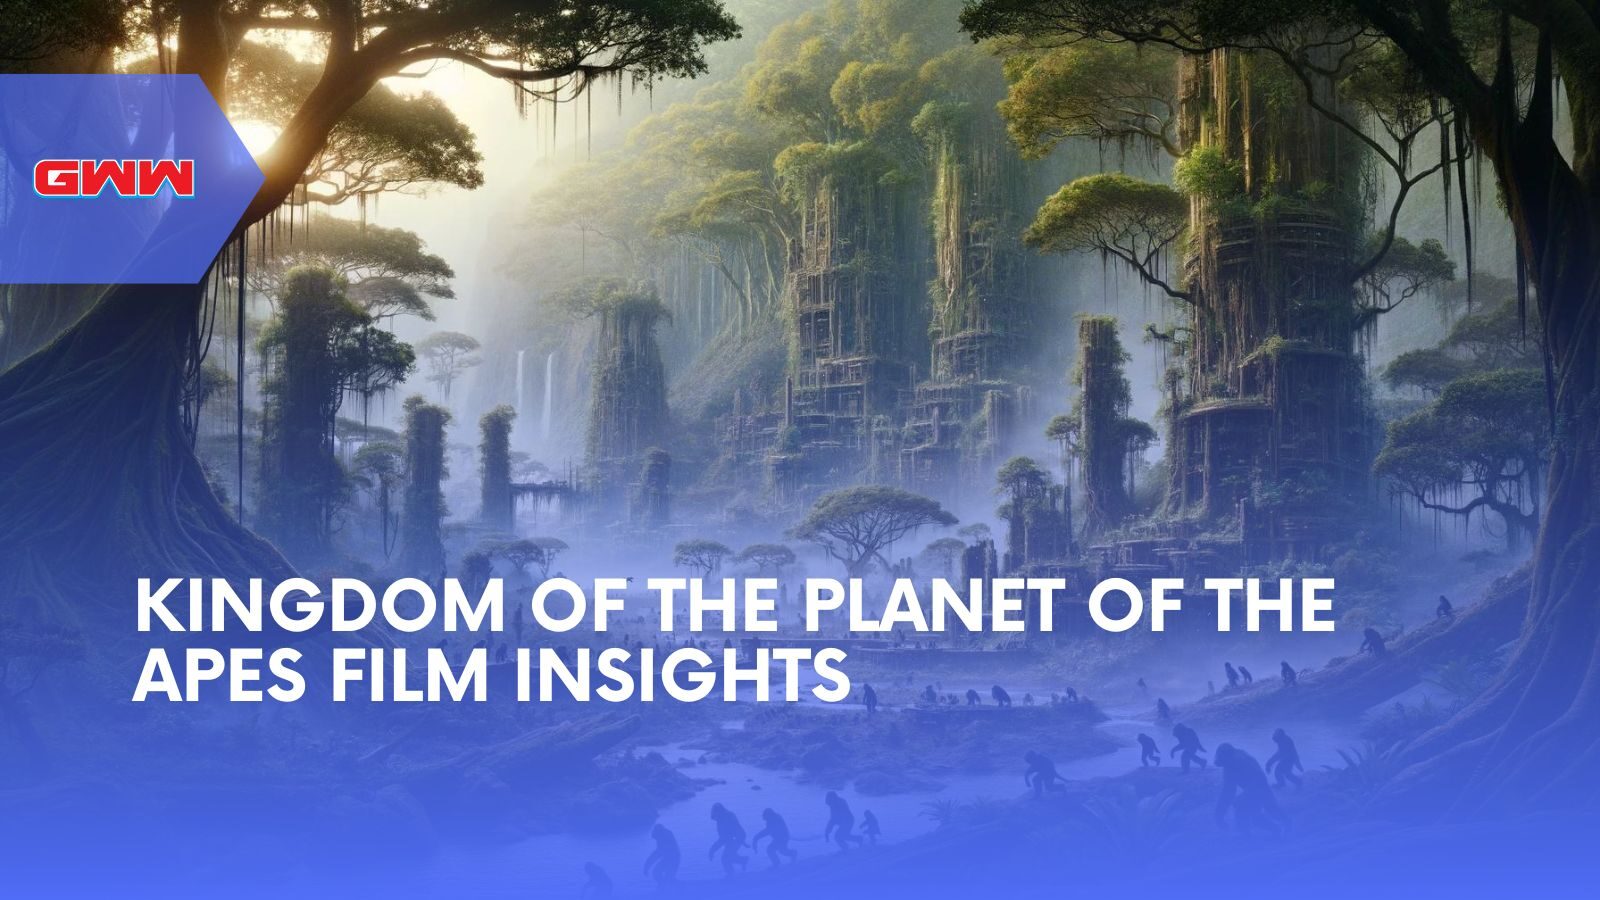 Kingdom of the Planet of the Apes Film Insights